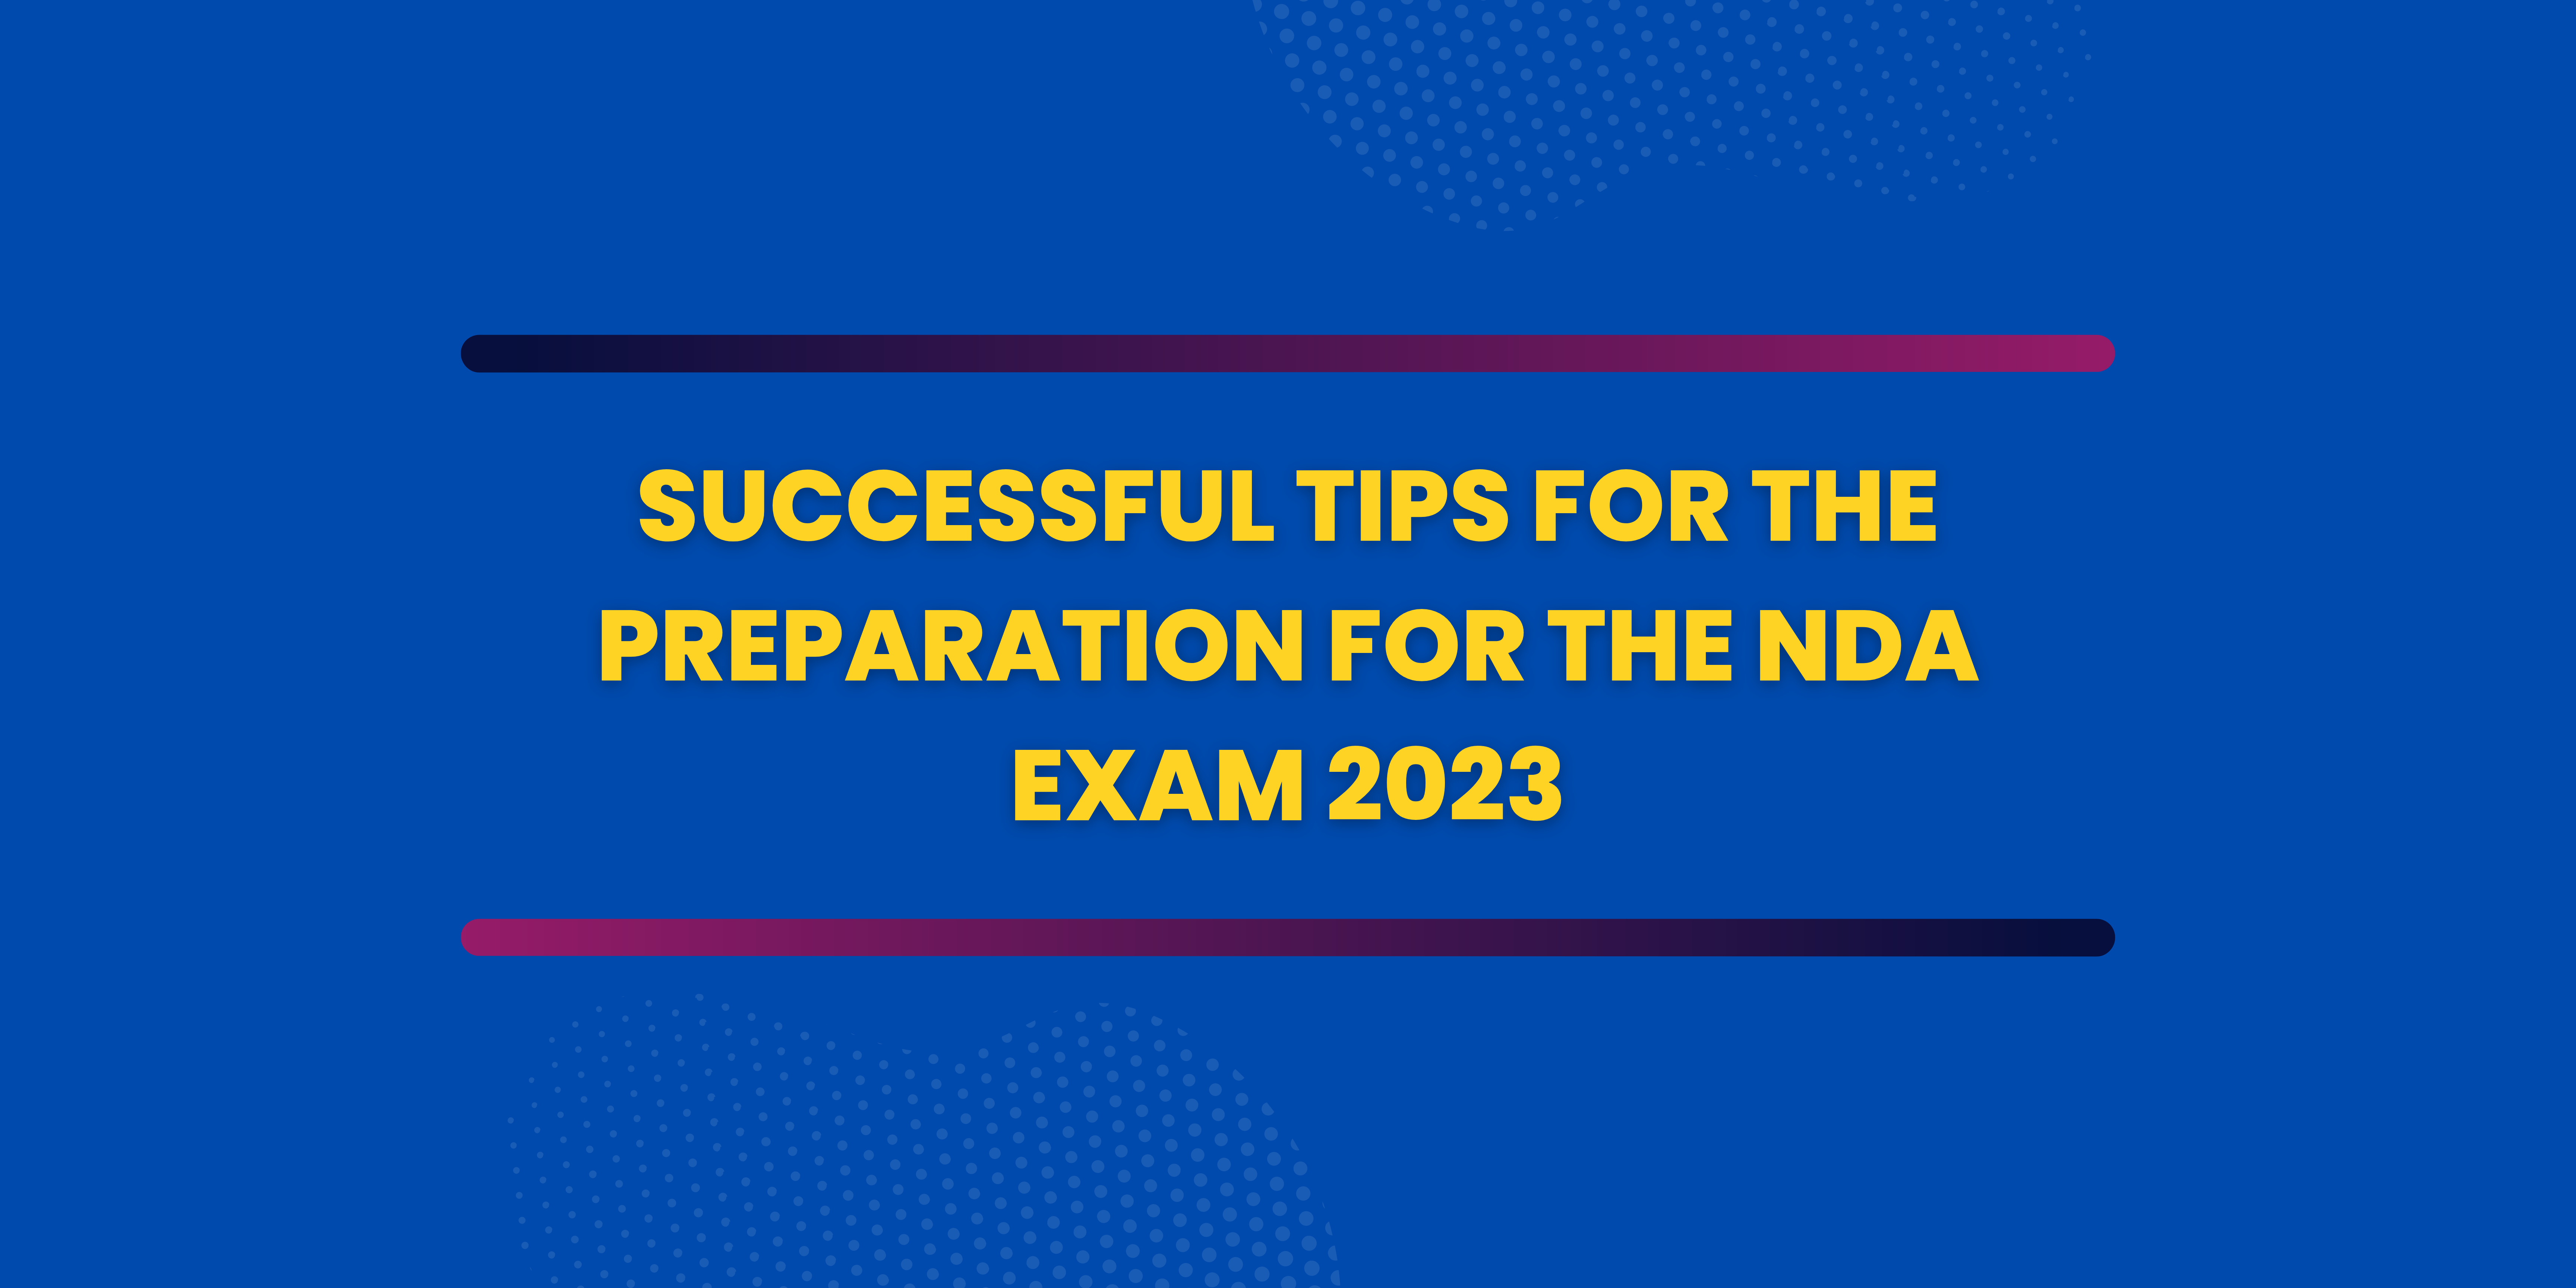 Successful Tips for the Preparation for the NDA Exam 2023